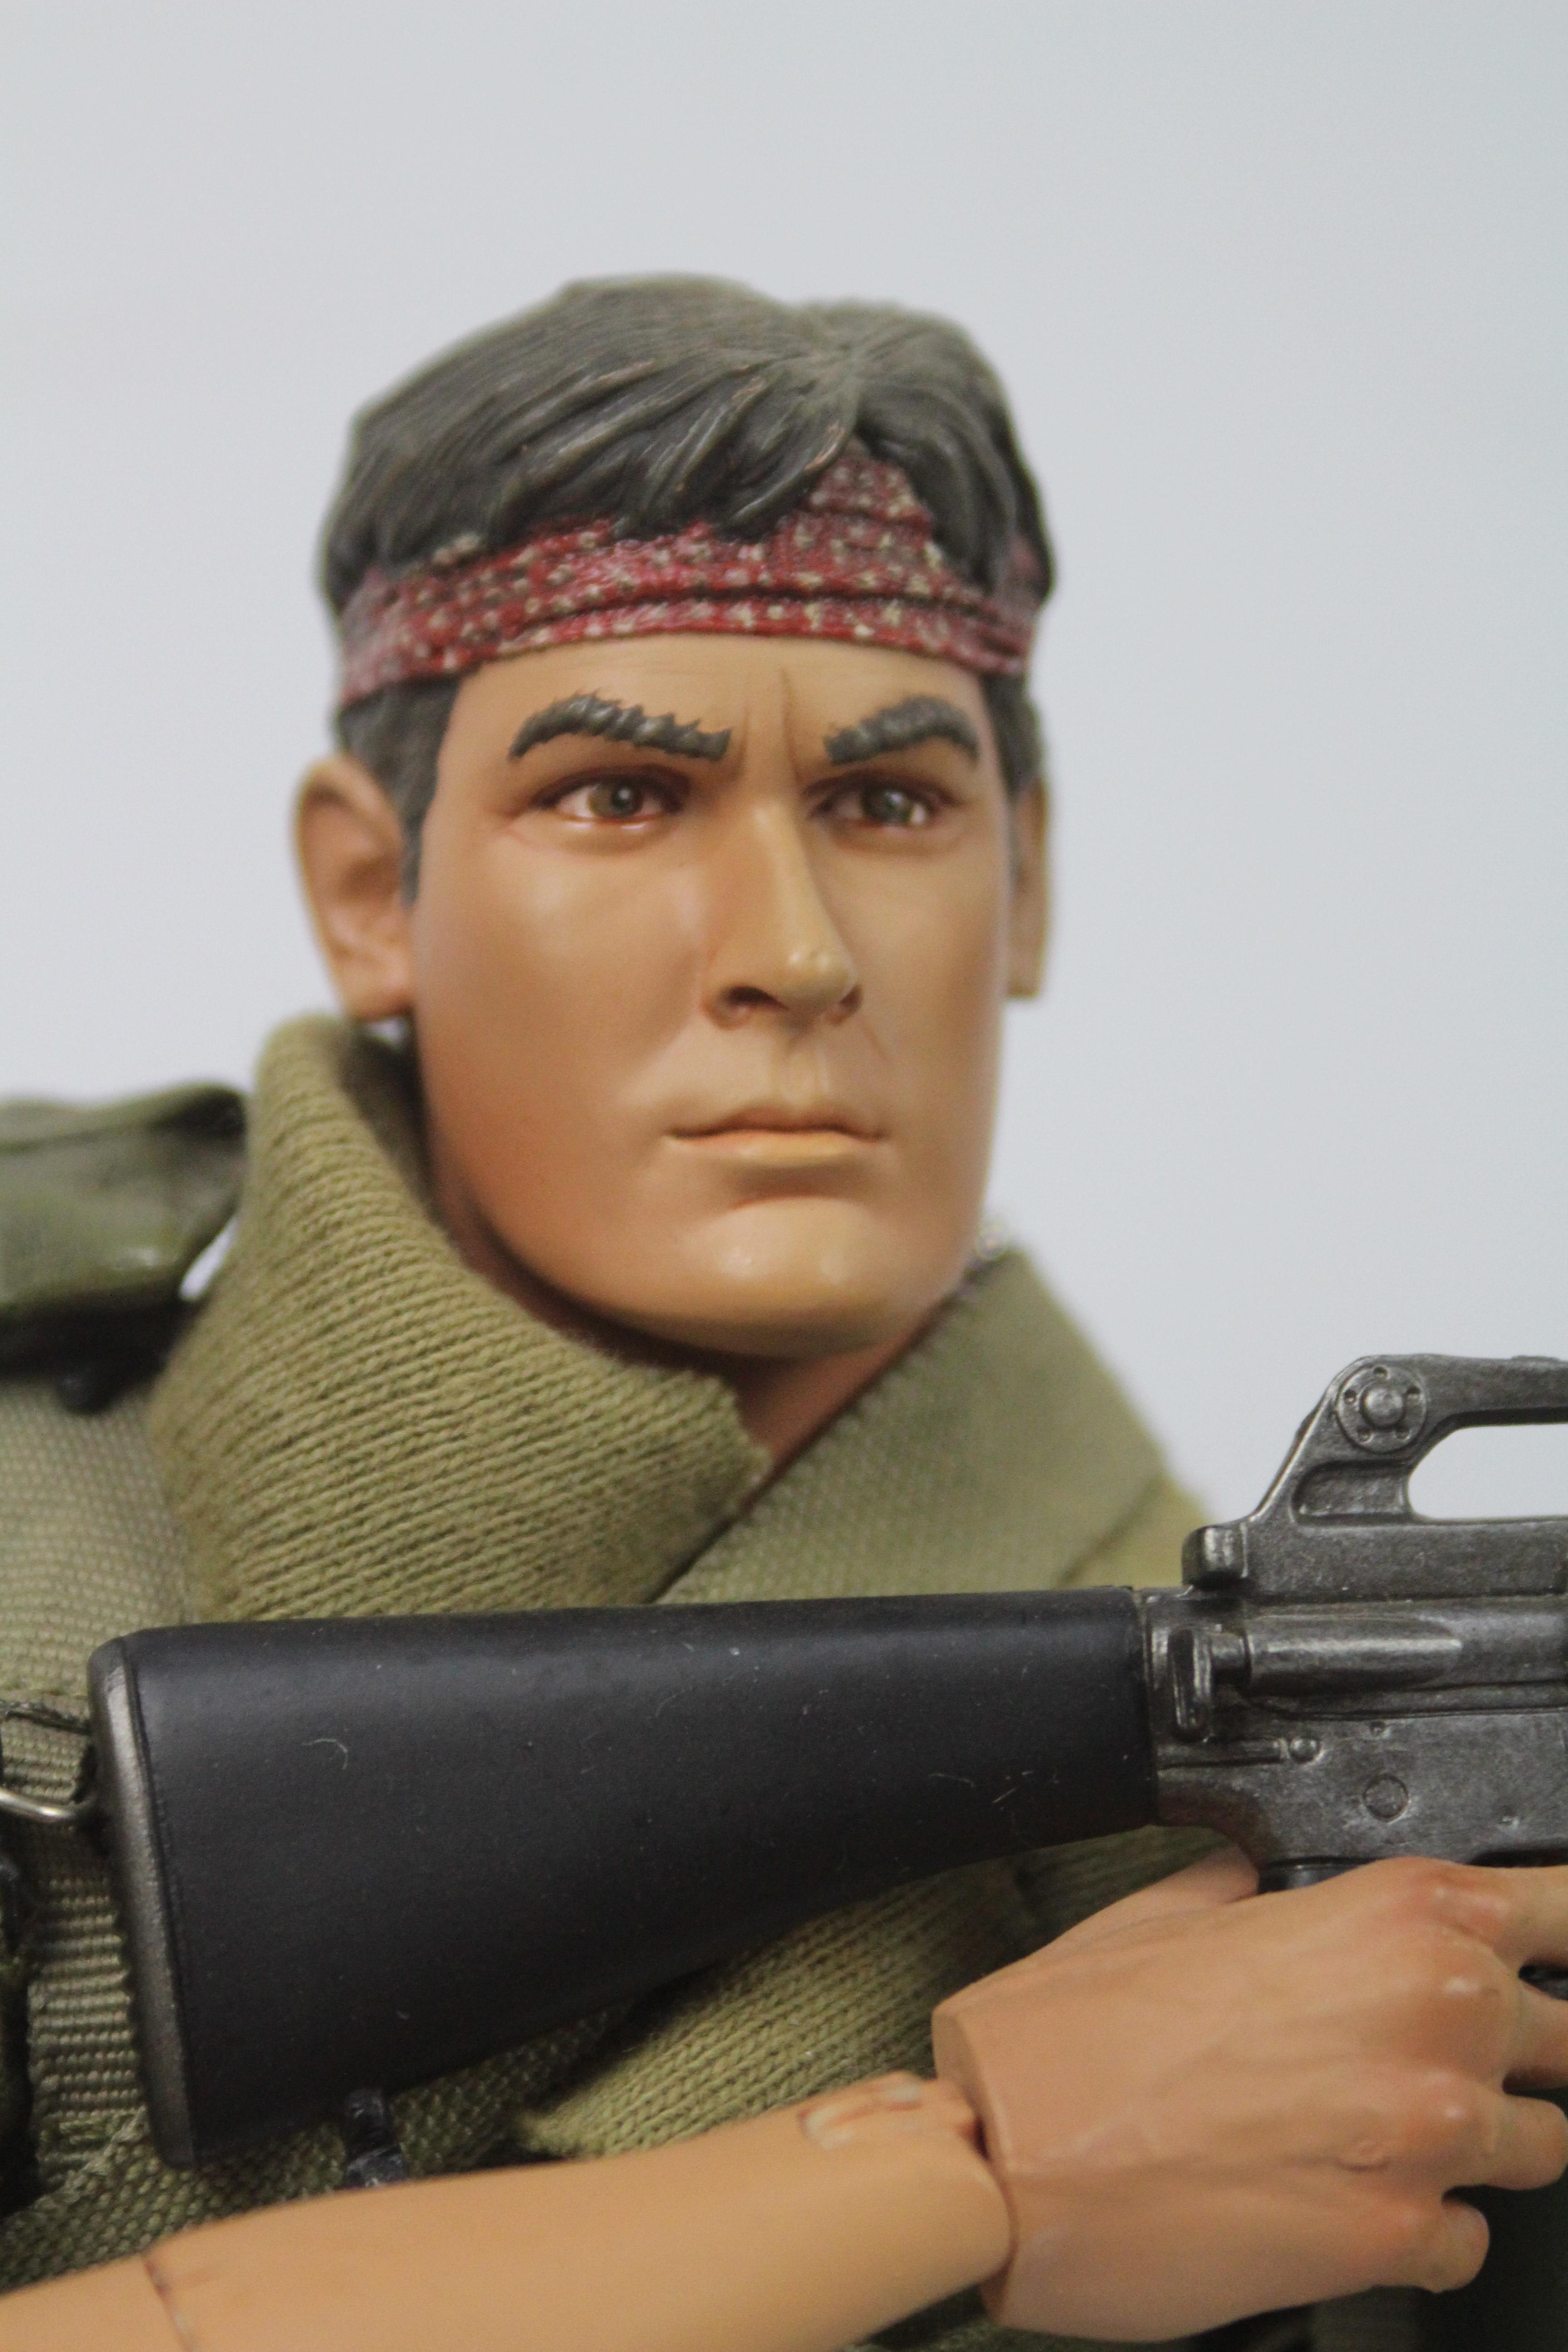 Sideshow Collectibles - Three unboxed 1:6 scale action figures from Sideshows 'Platoon' series, - Image 5 of 8